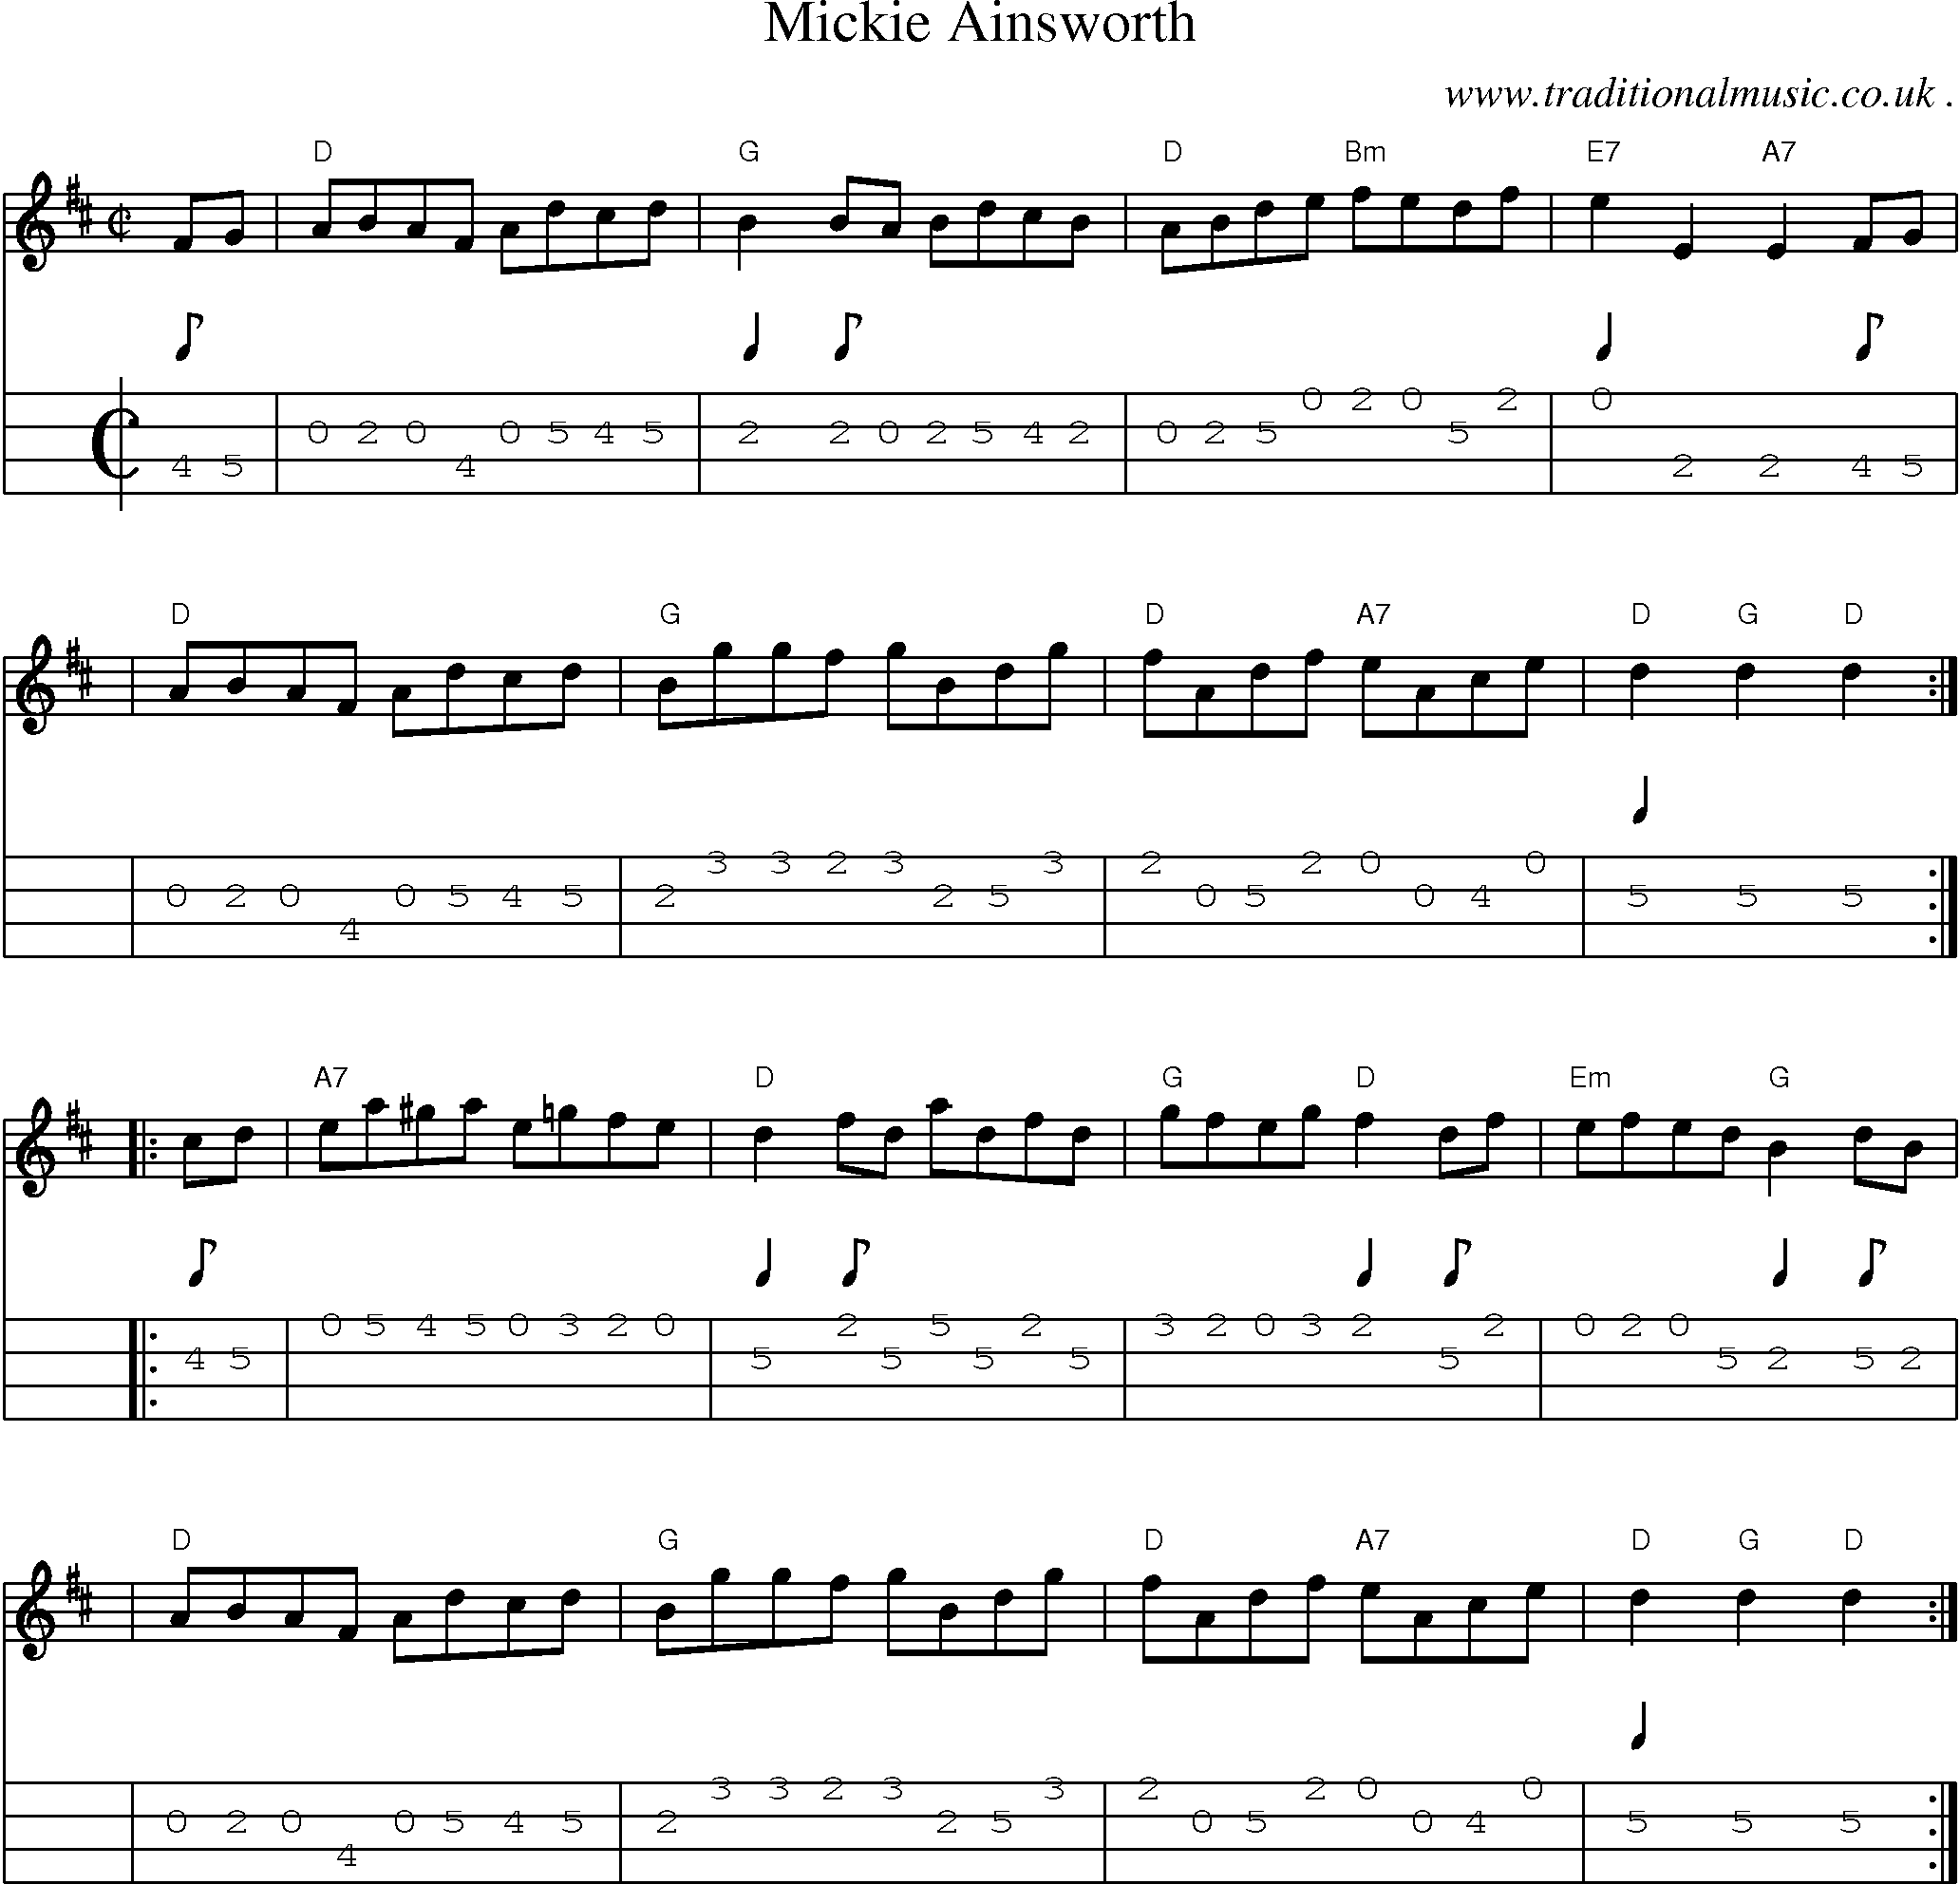 Sheet-music  score, Chords and Mandolin Tabs for Mickie Ainsworth